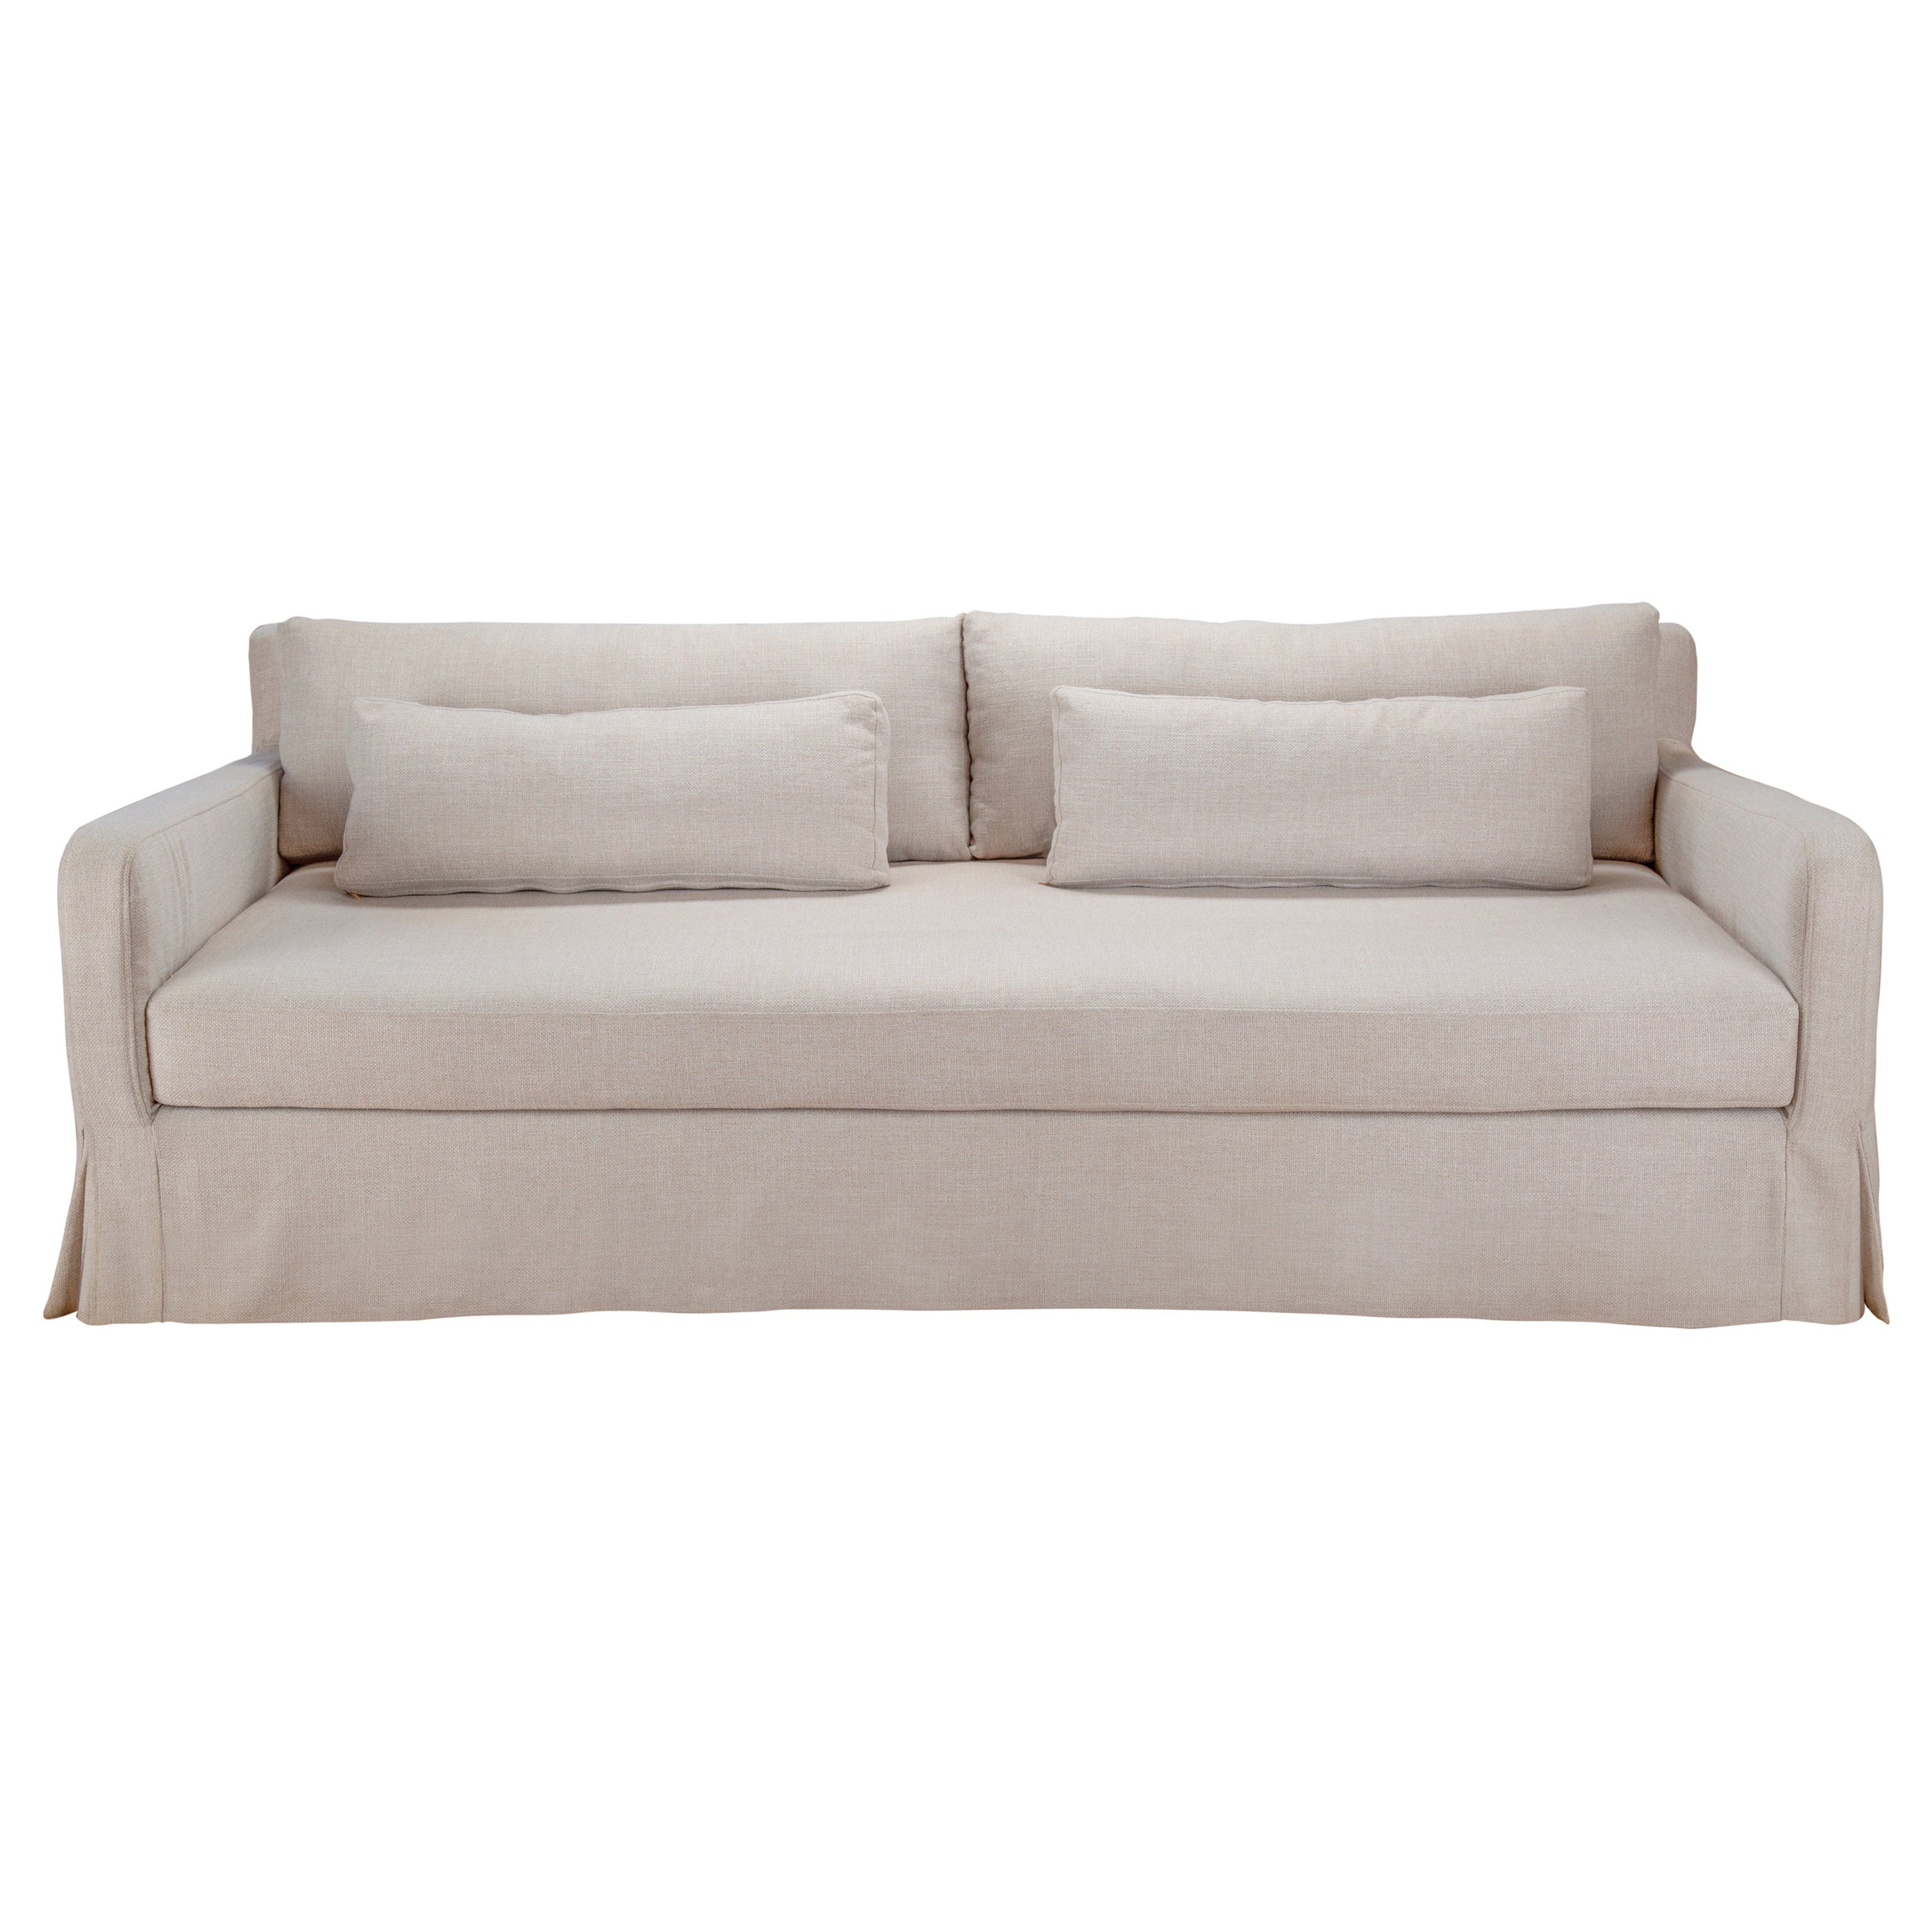 Modern Comfortable Slip-on 3-Seater Sofa with Double Stitching and Foam Filling